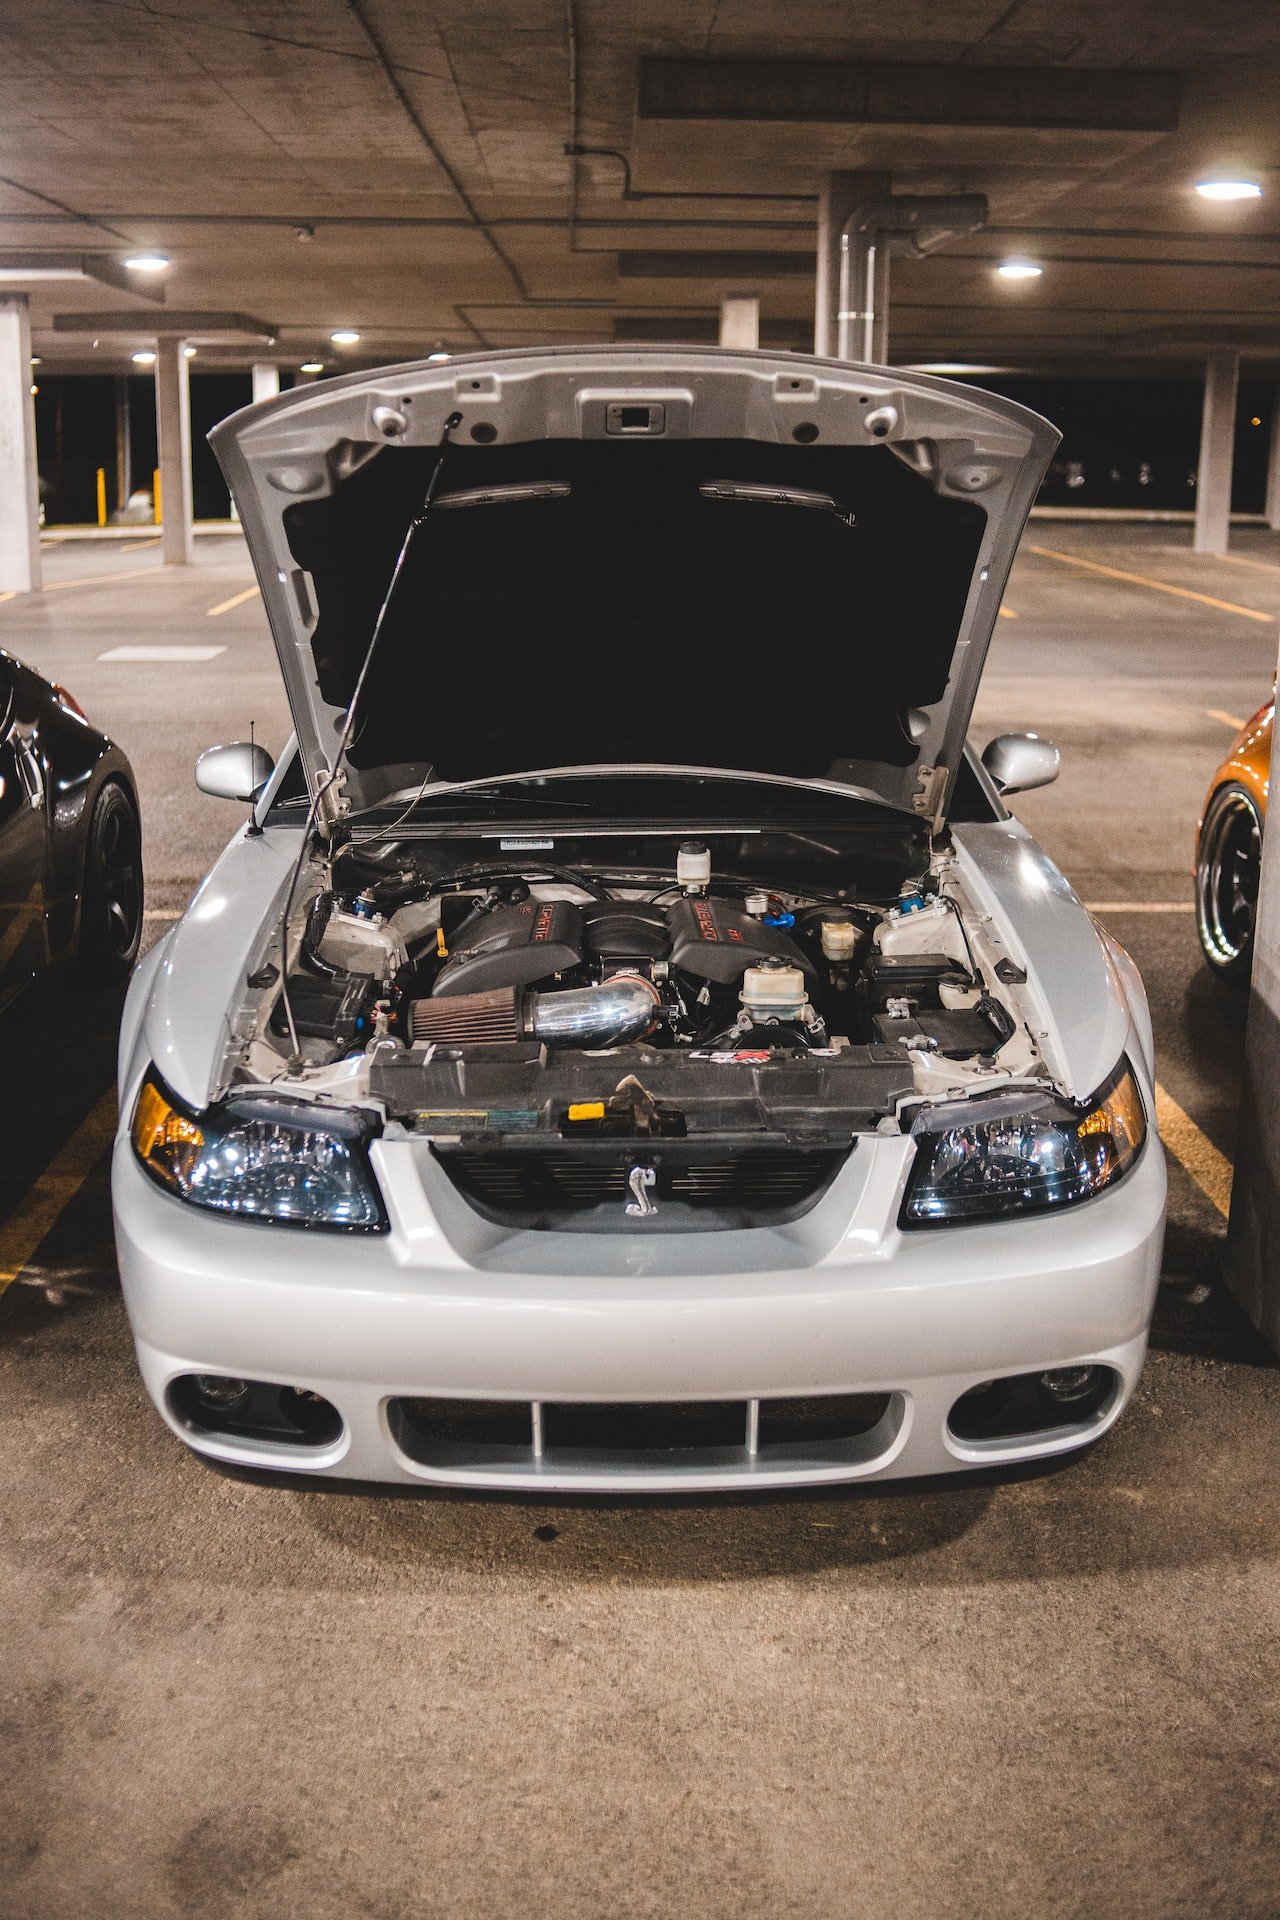 Experience transparent and reliable service at Treasure Valley Auto Care, the one-stop shop for your vehicle needs.